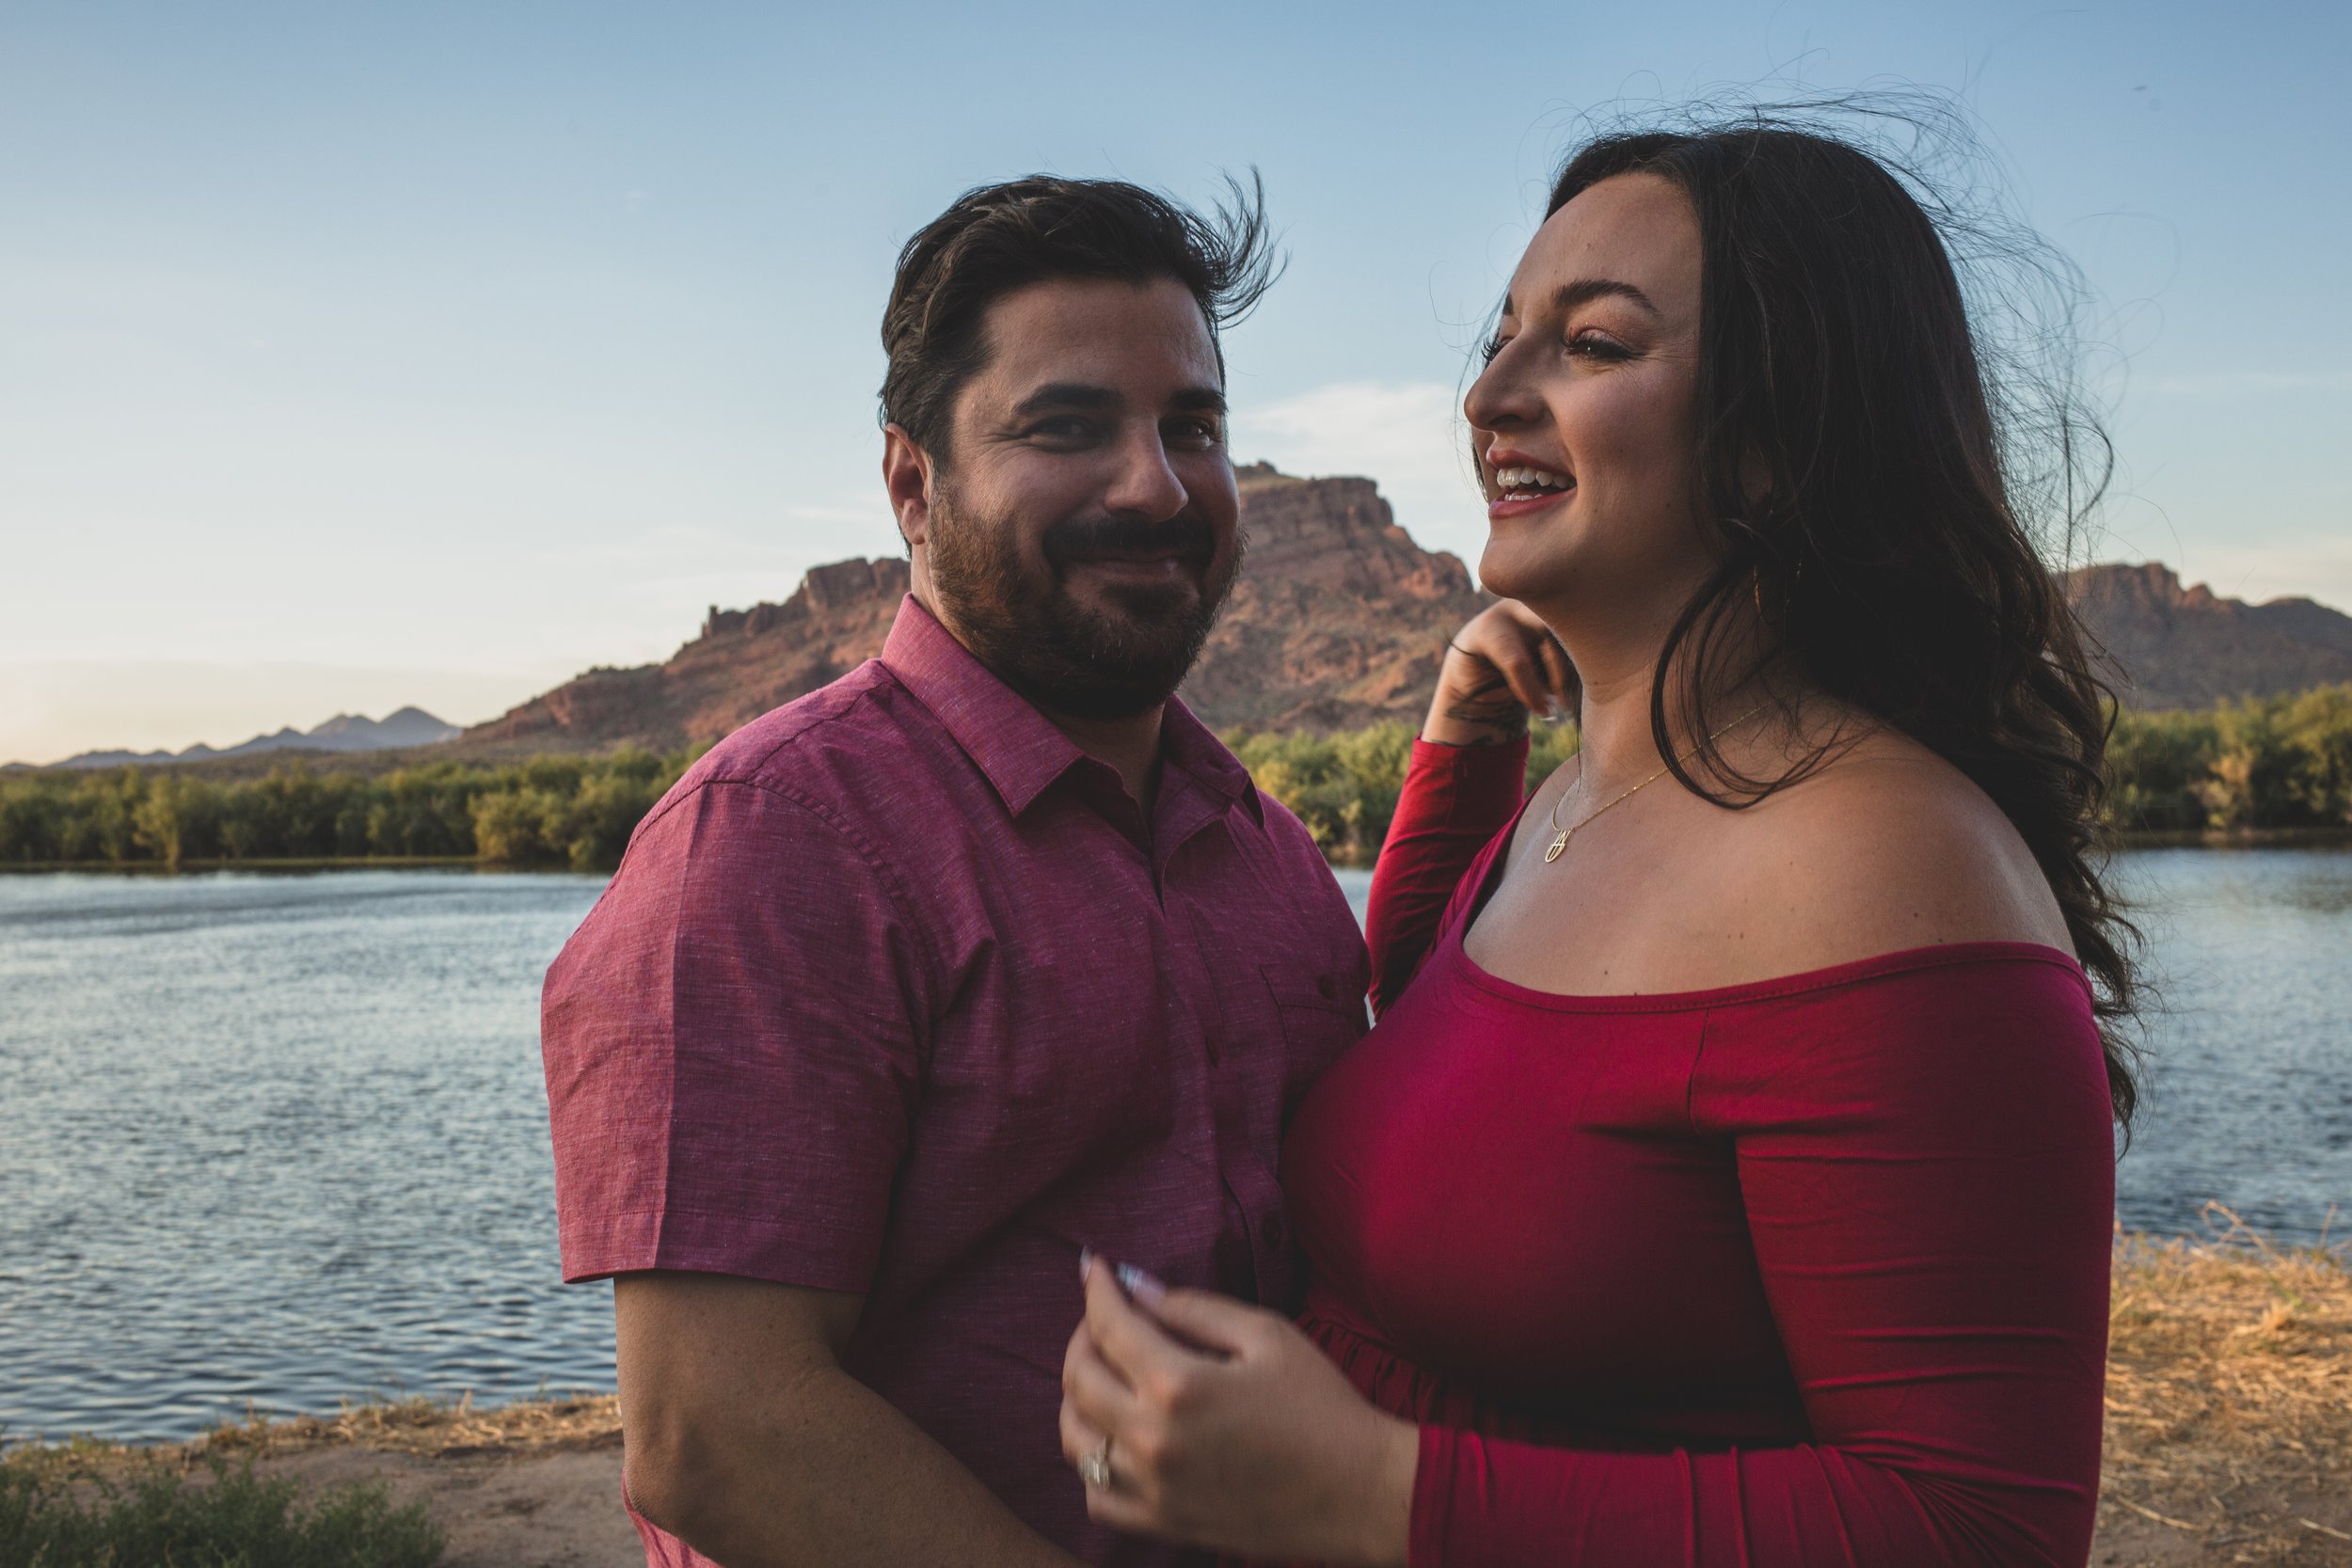 Pregnant woman stands with her partner in a red dress for candid maternity photos in front of the Salt River and mountain by the best maternity photographer in Phoenix; Jennifer Lind Schutsky.